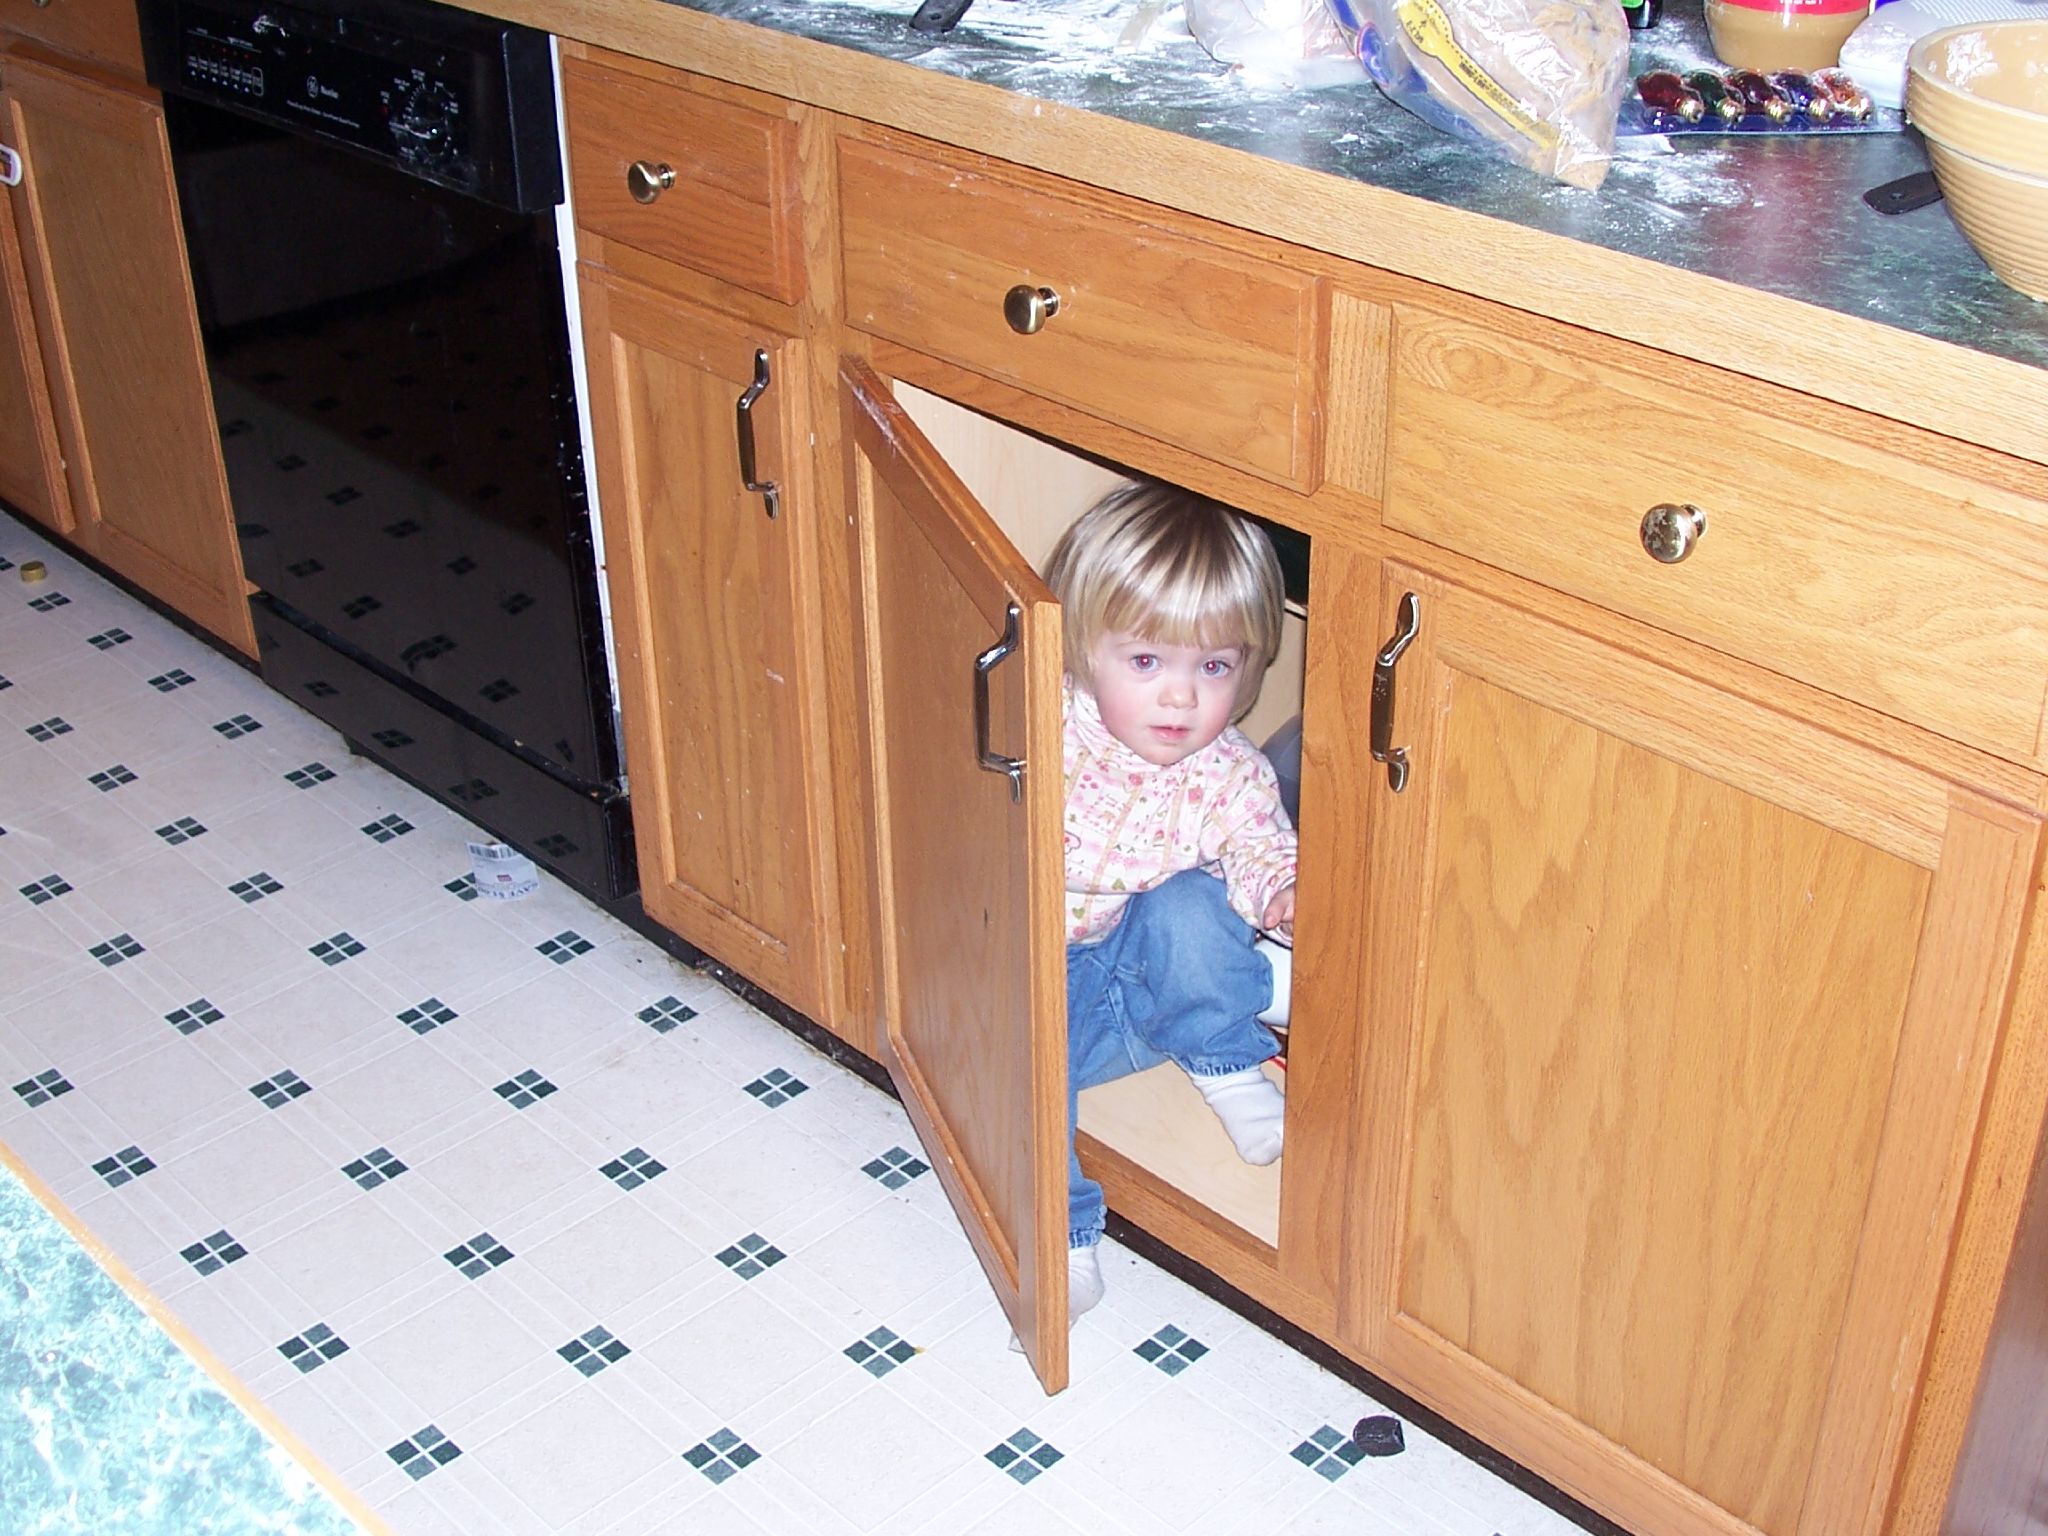 a little girl sitting in the corner of a kitchen cupboard